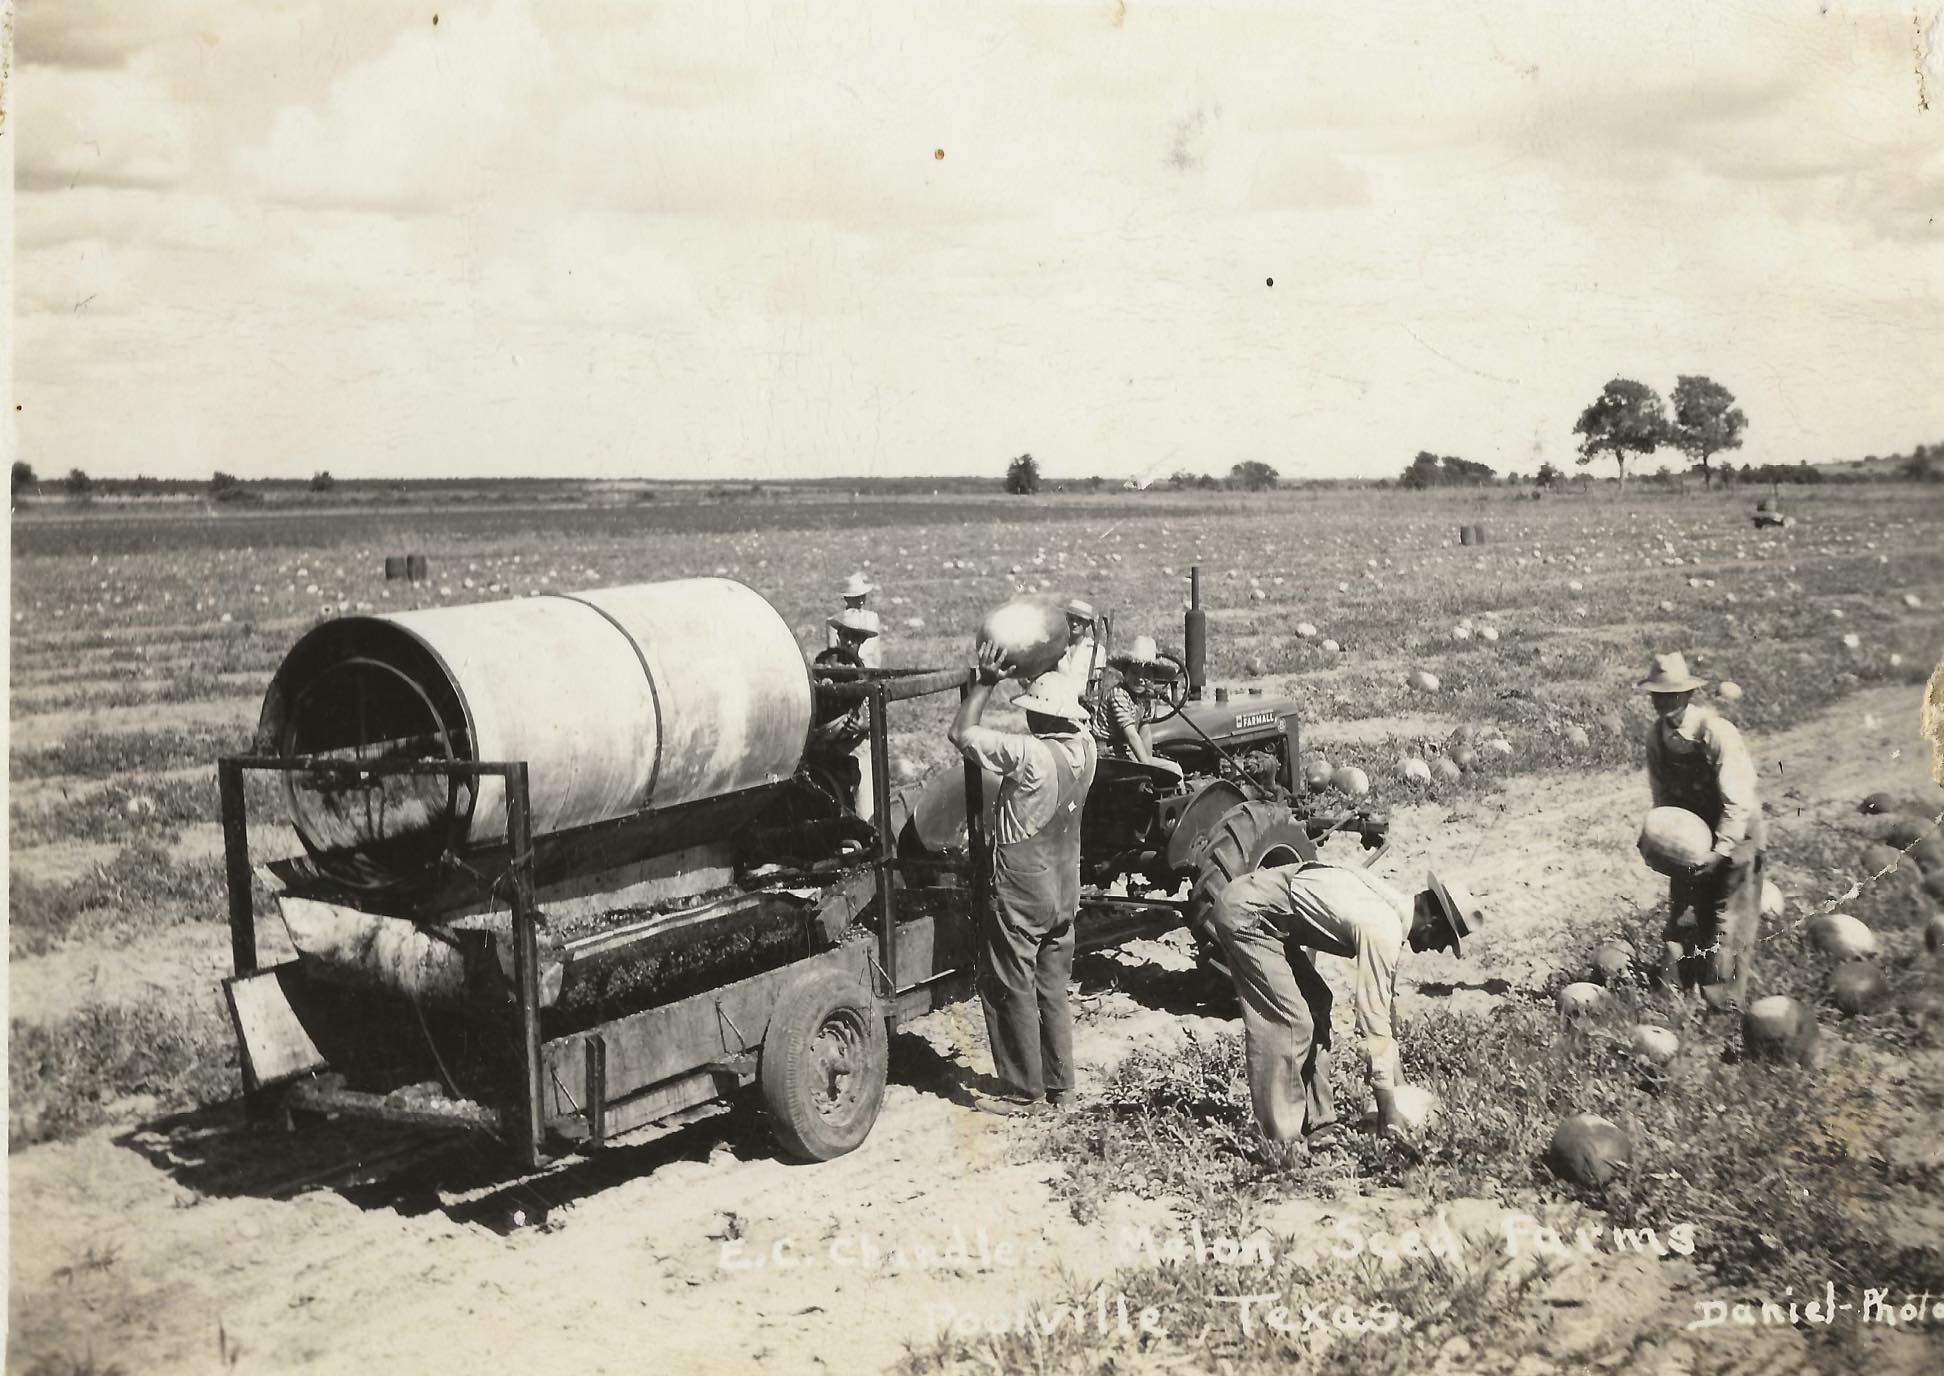 Three men load watermelons from a field into a truck in a vintage photograph